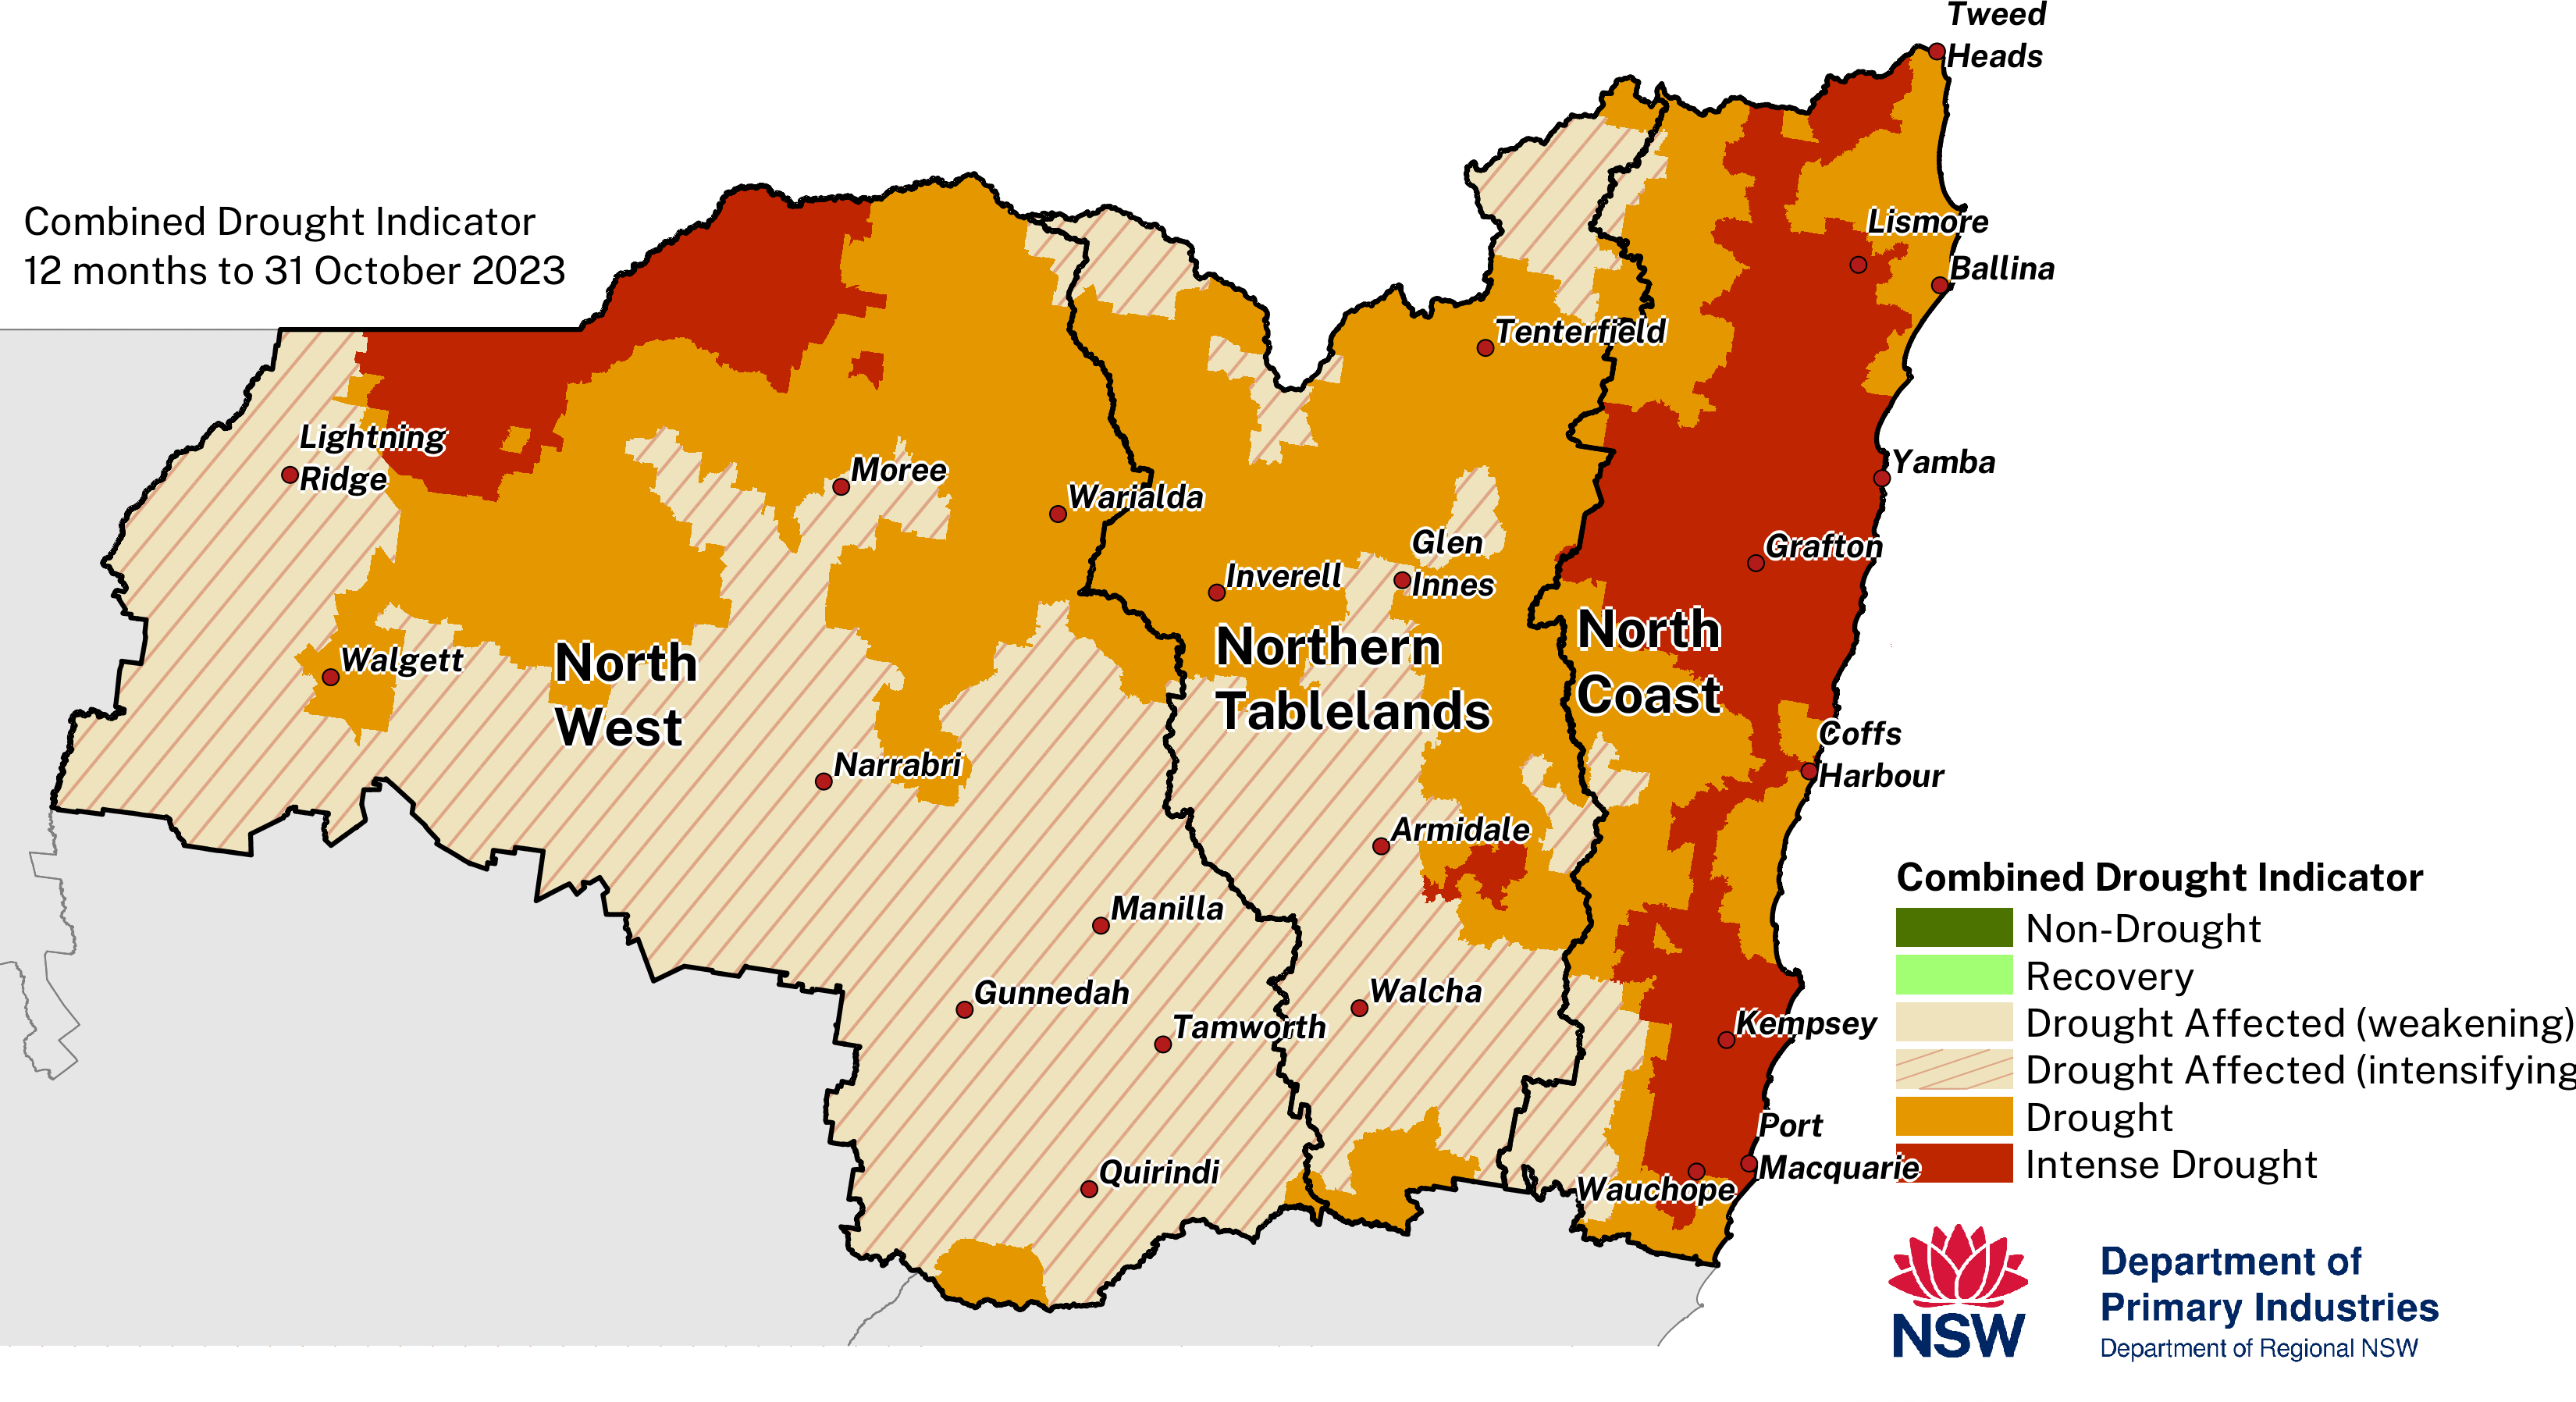 Figure 24. Combined Drought Indicator for the North West, Northern Tableland and North Coast regions 